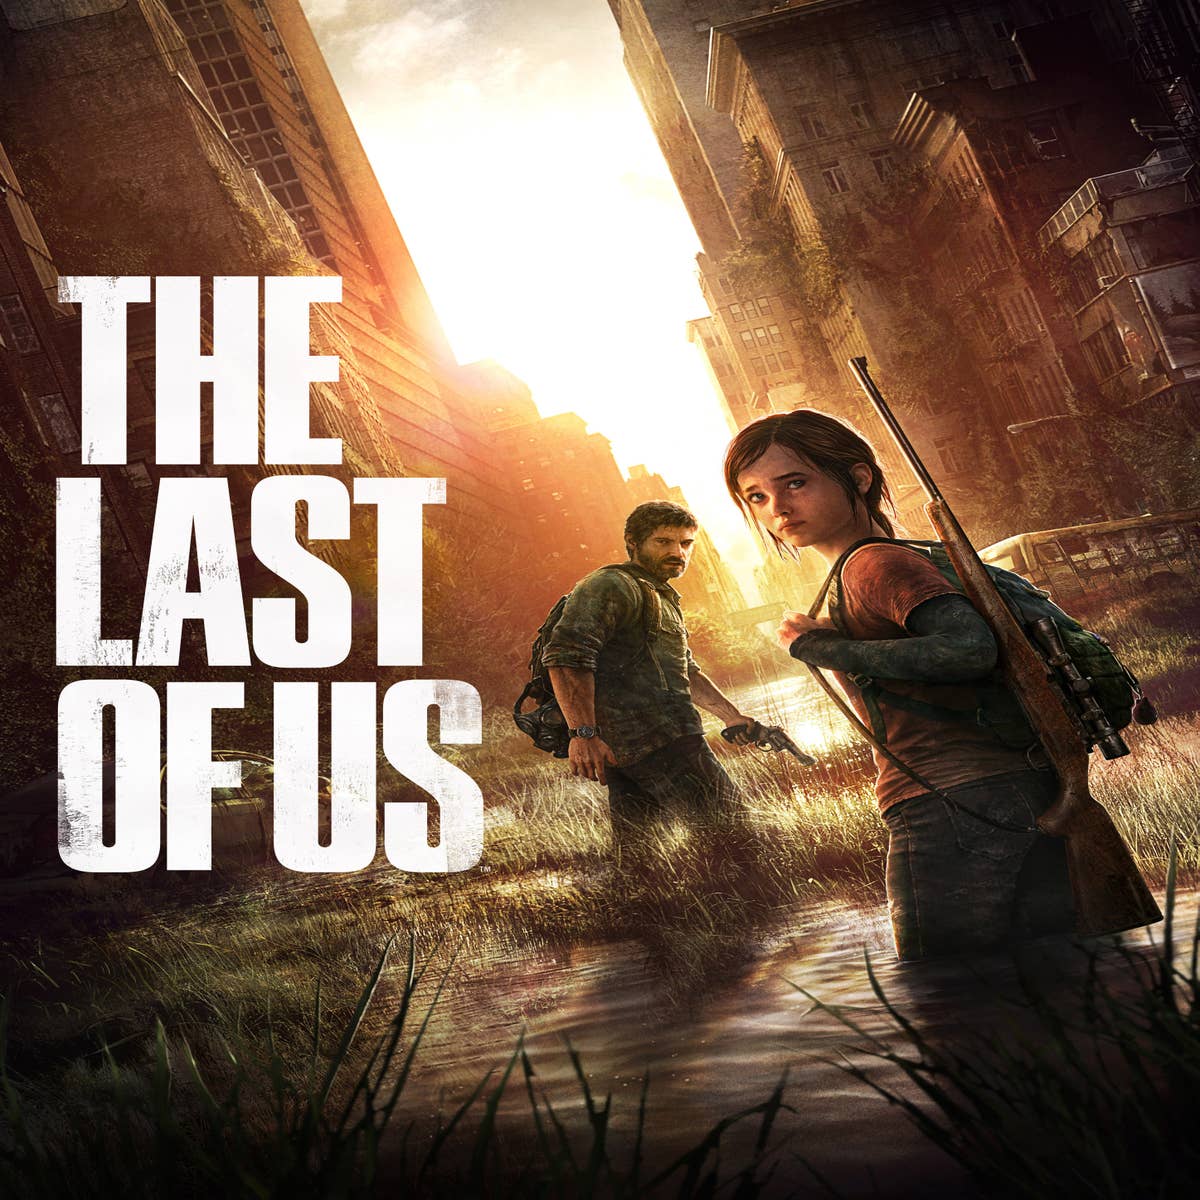 The Last of Us Part I - Launch Trailer